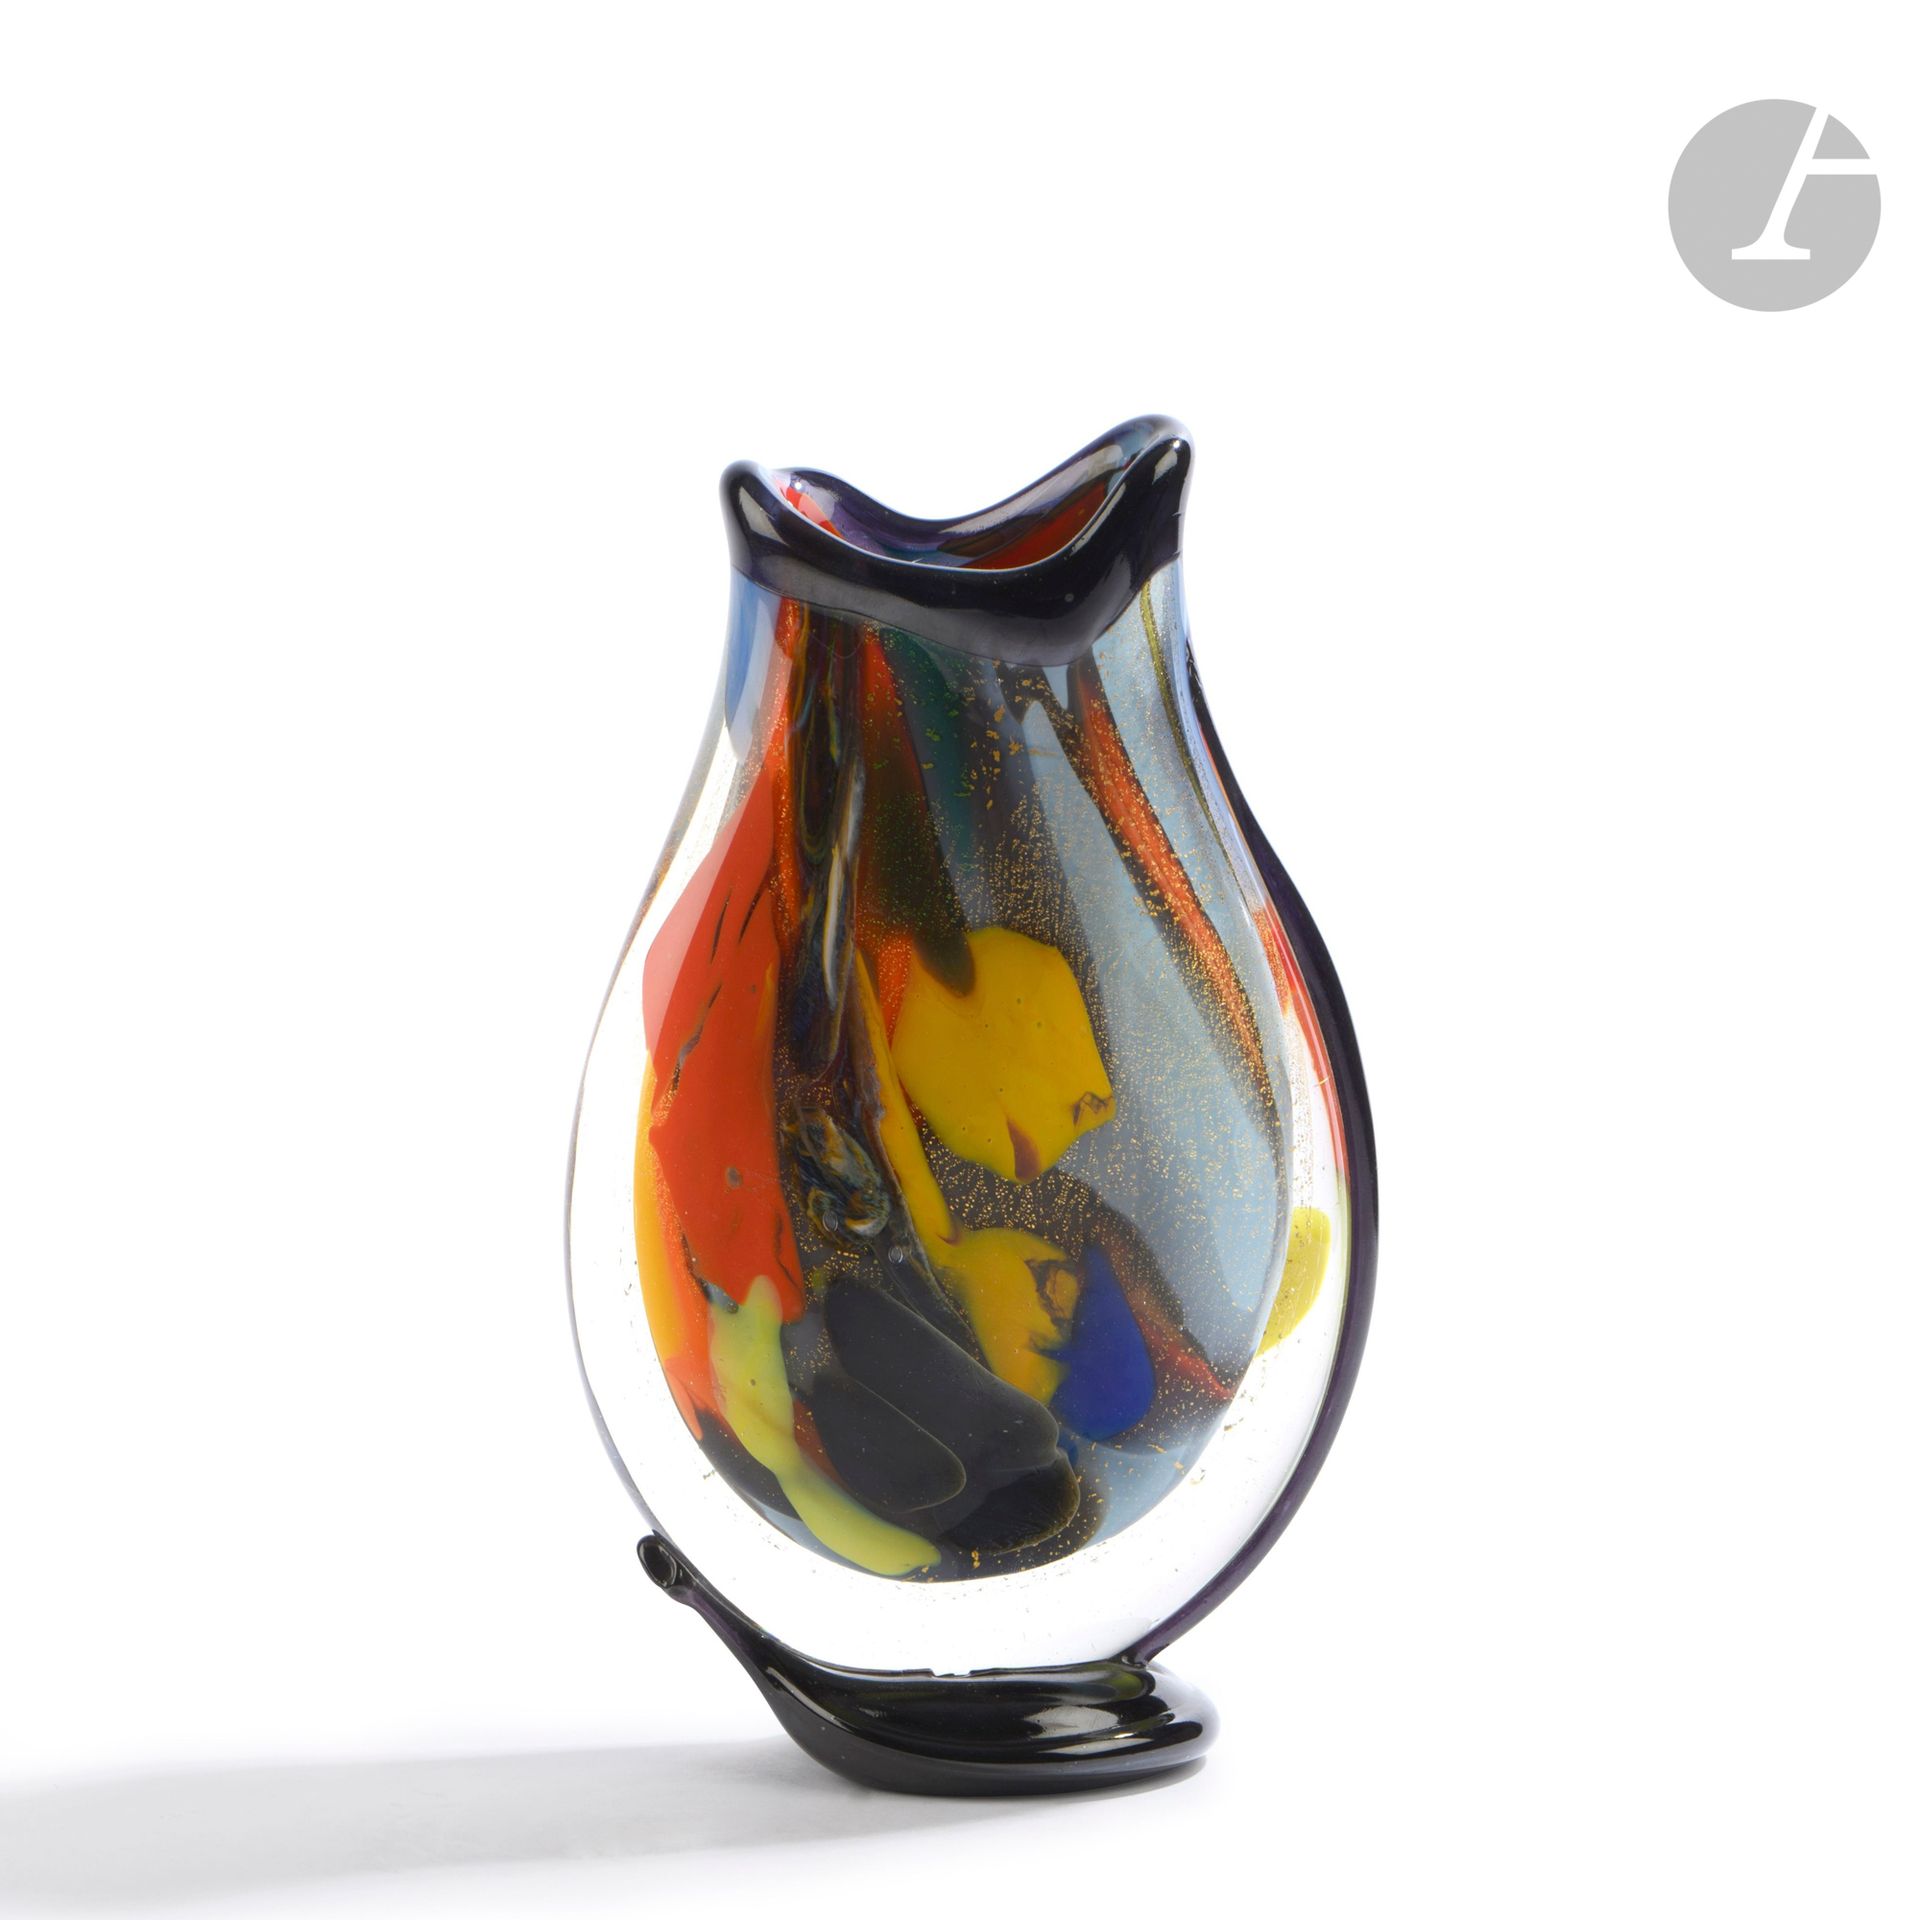 Null Pascal GUYOT (France, born in 1959)
Free form blown glass vase with polychr&hellip;